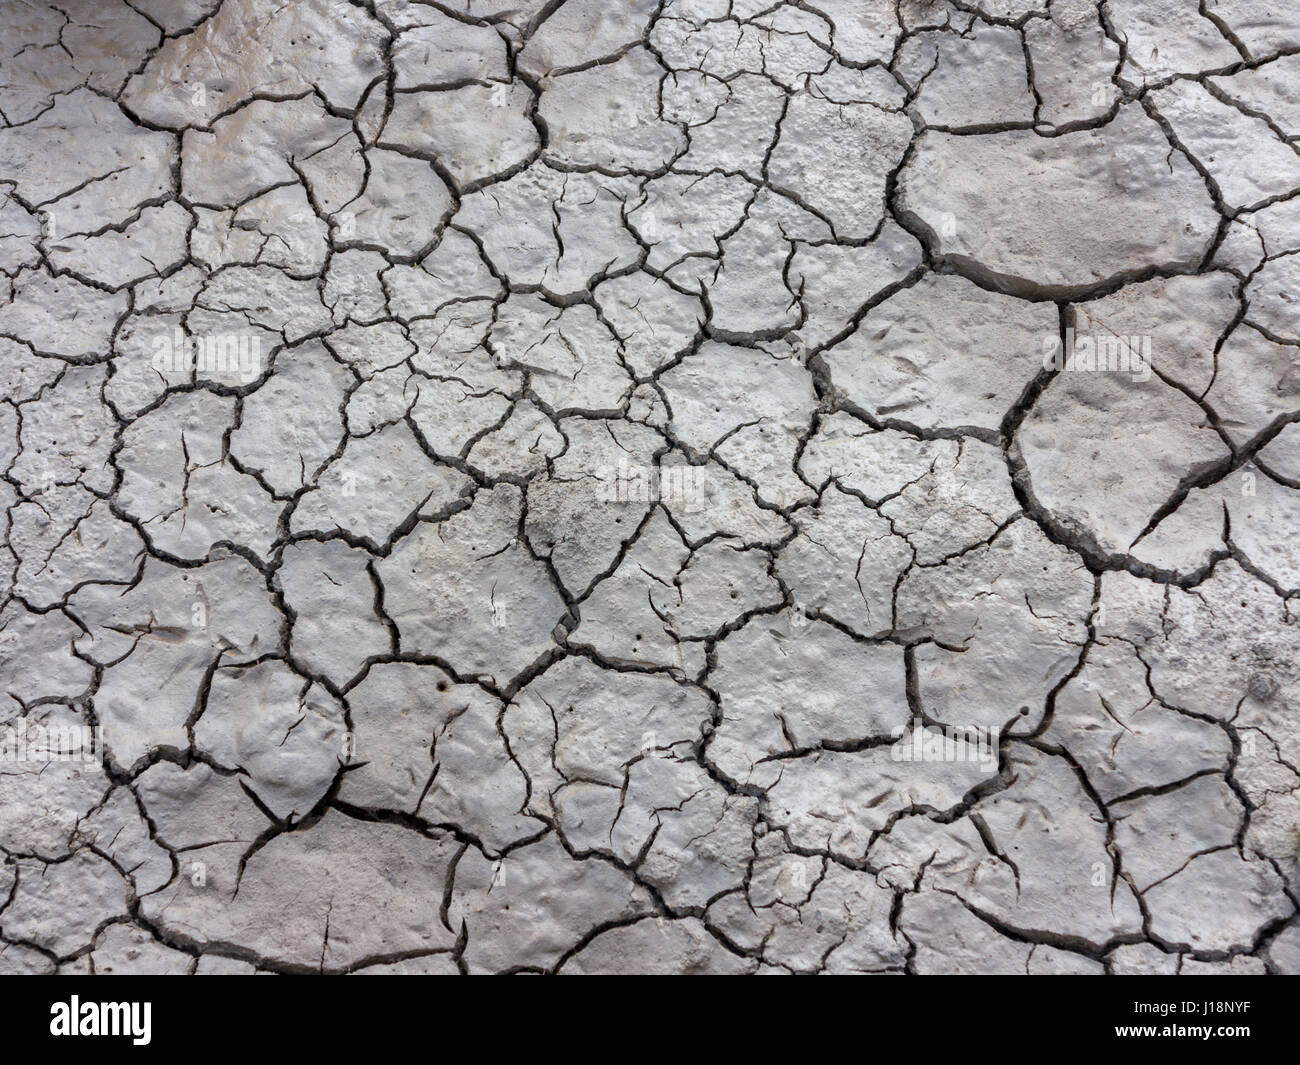 Close up area of dry cracked and crazed mud Stock Photo